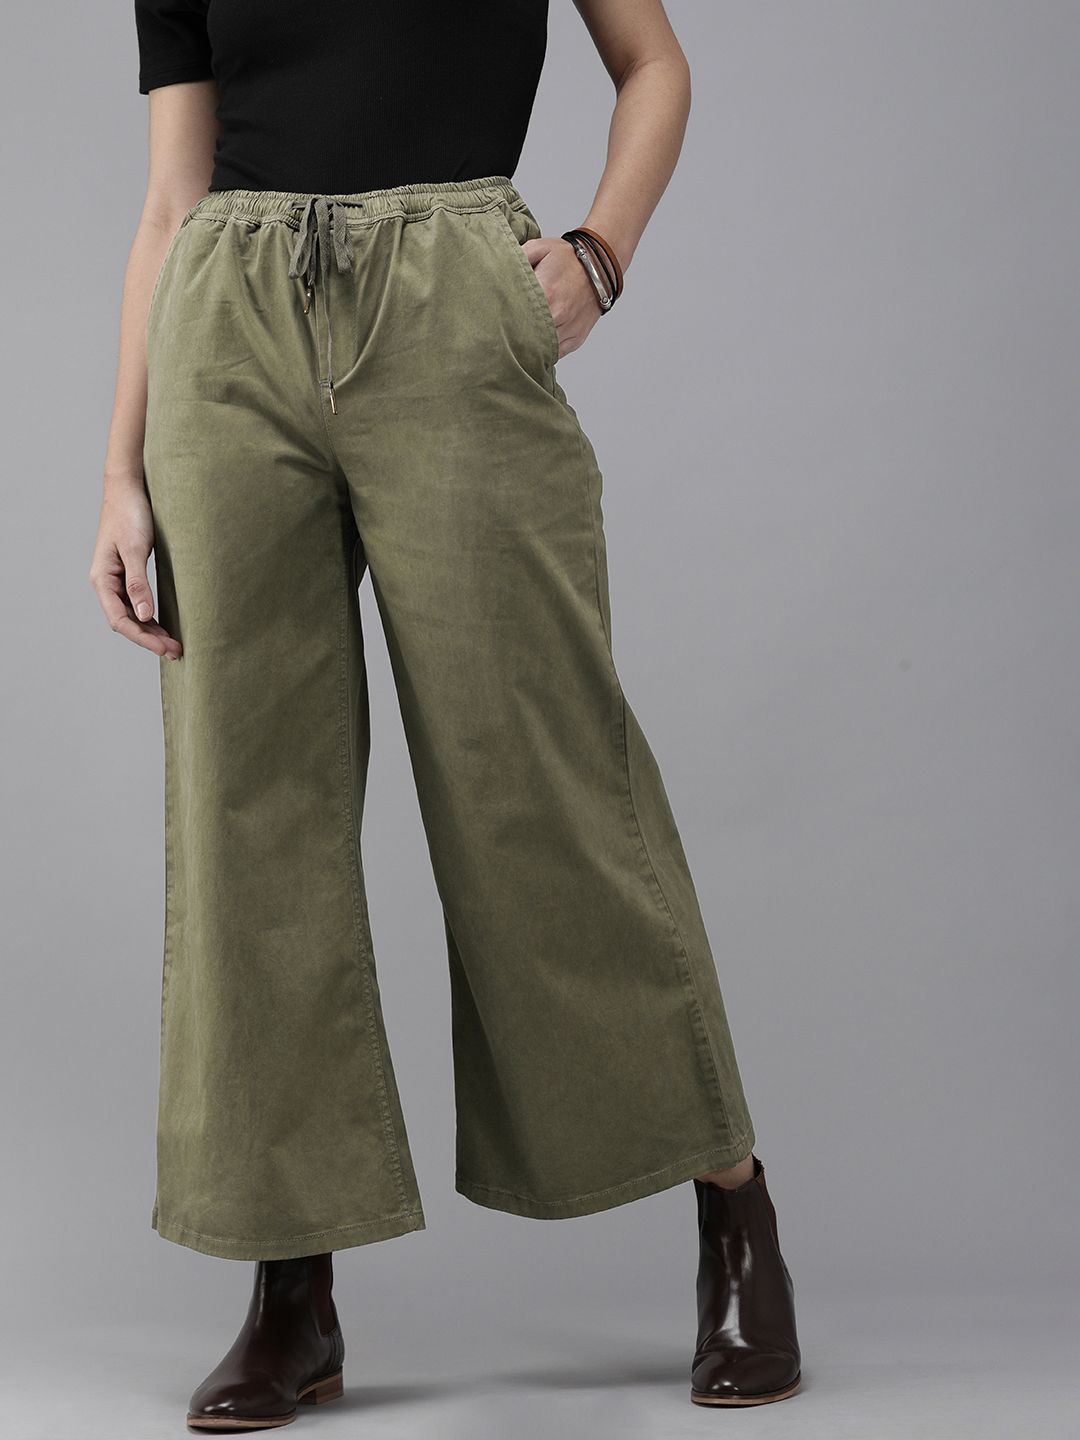 The Roadster Lifestyle Co Women Olive Green Cropped Flared Chinos Price in India